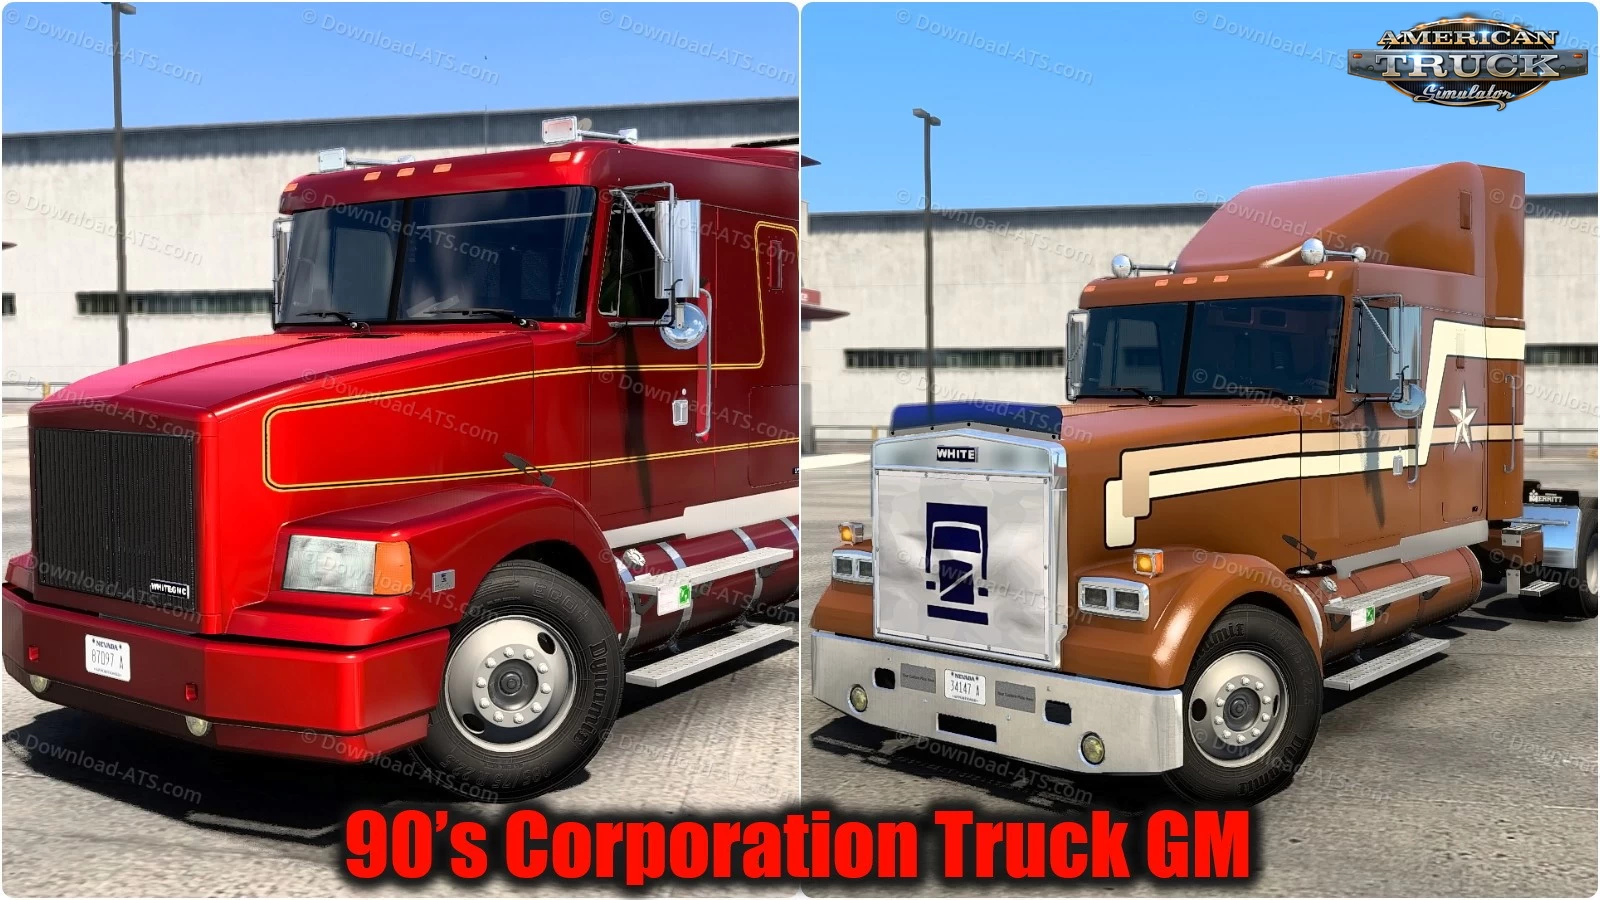 90’s Corporation Truck GM v2.0f (1.47.x) for ATS